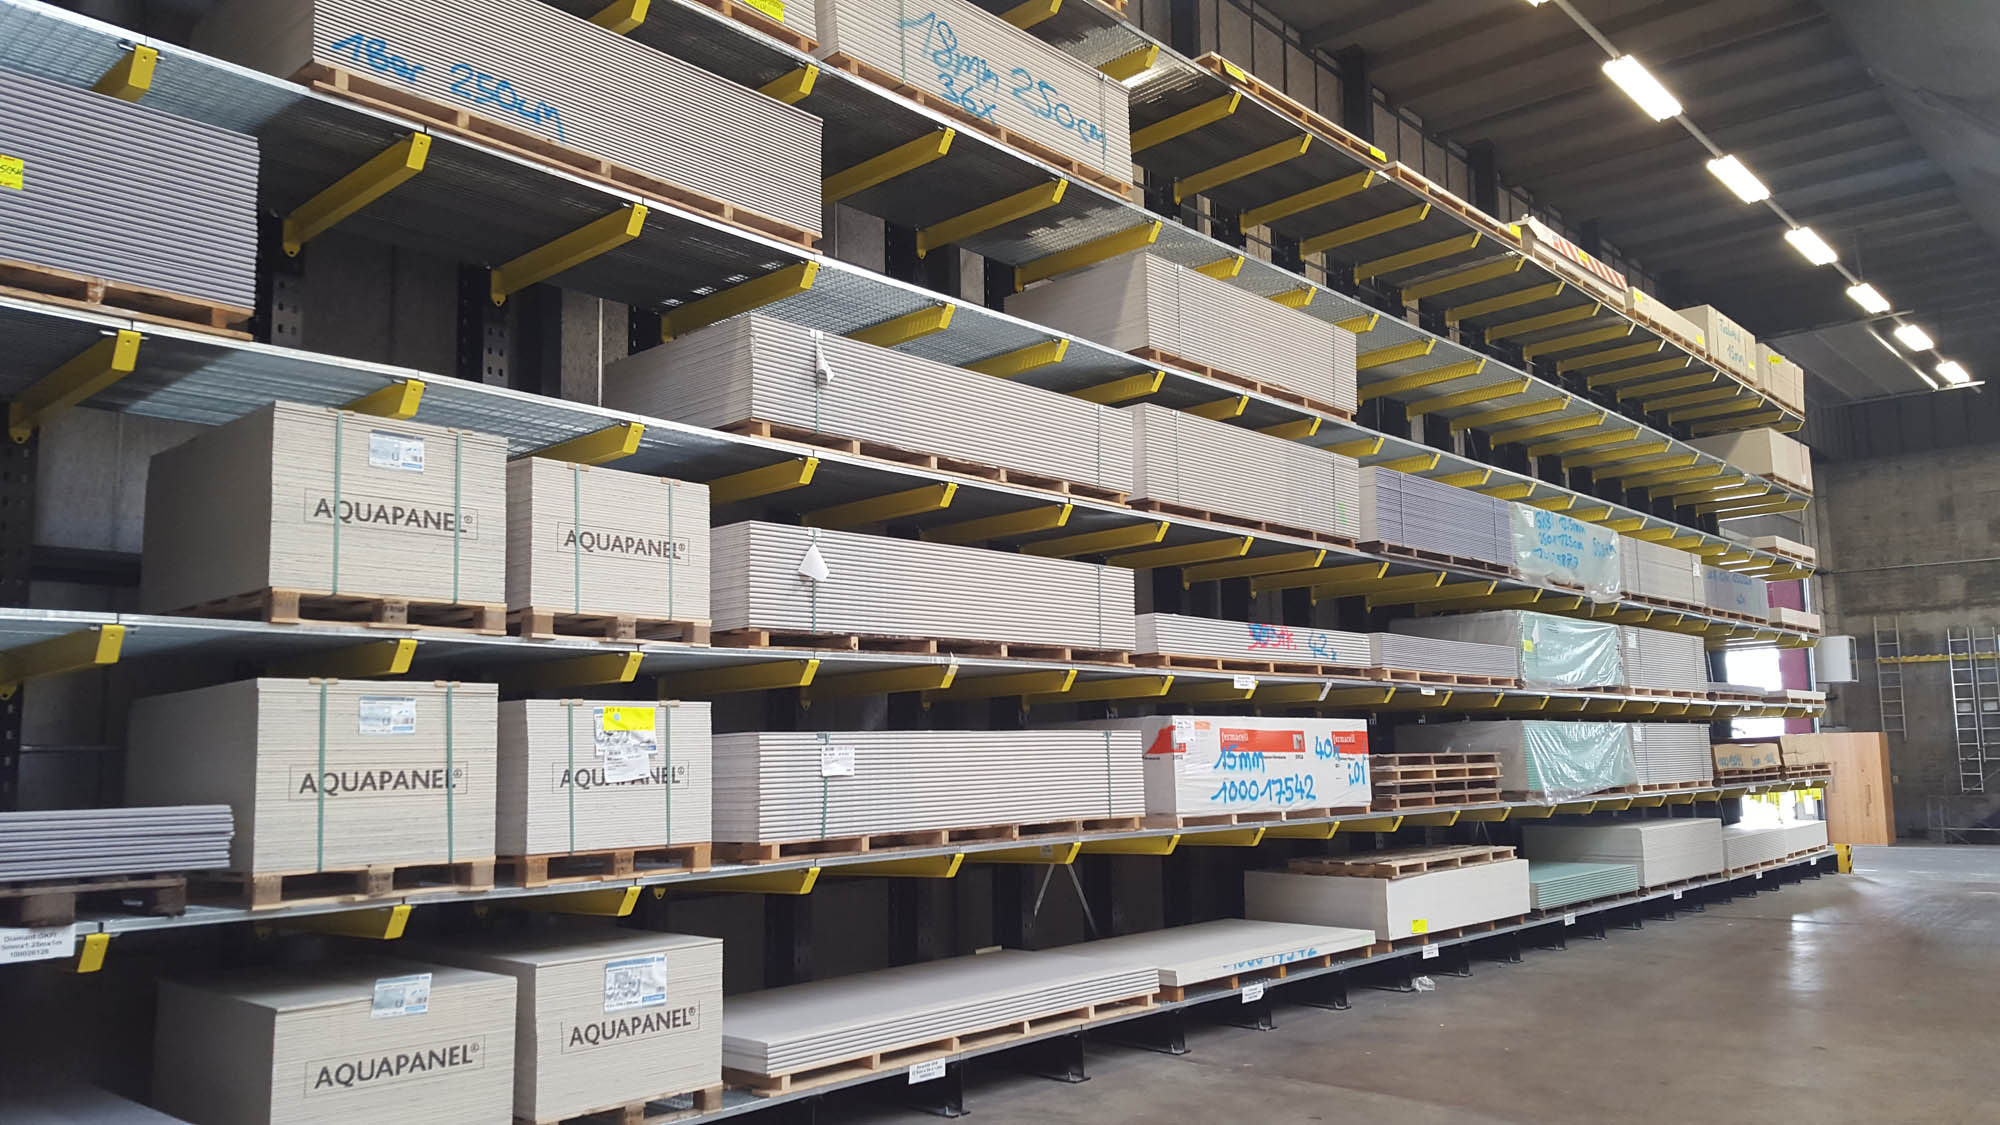 cantilever racking systems for the storage of building material